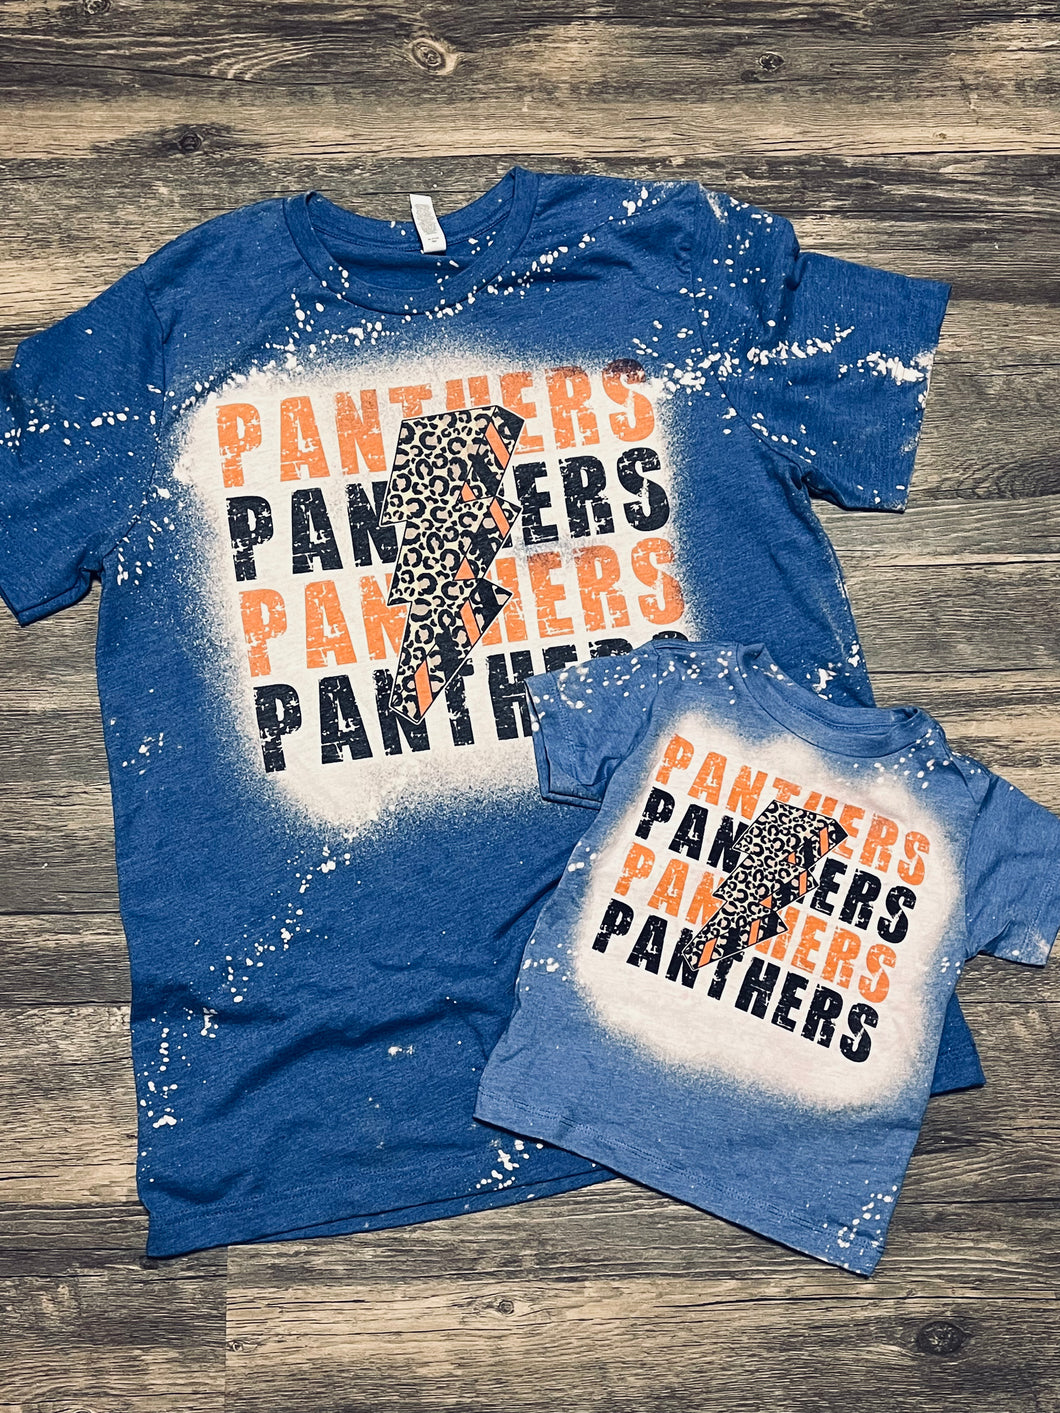 Panthers repeat leopard bolt blue bleached graphic tee - Mavictoria Designs Hot Press Express